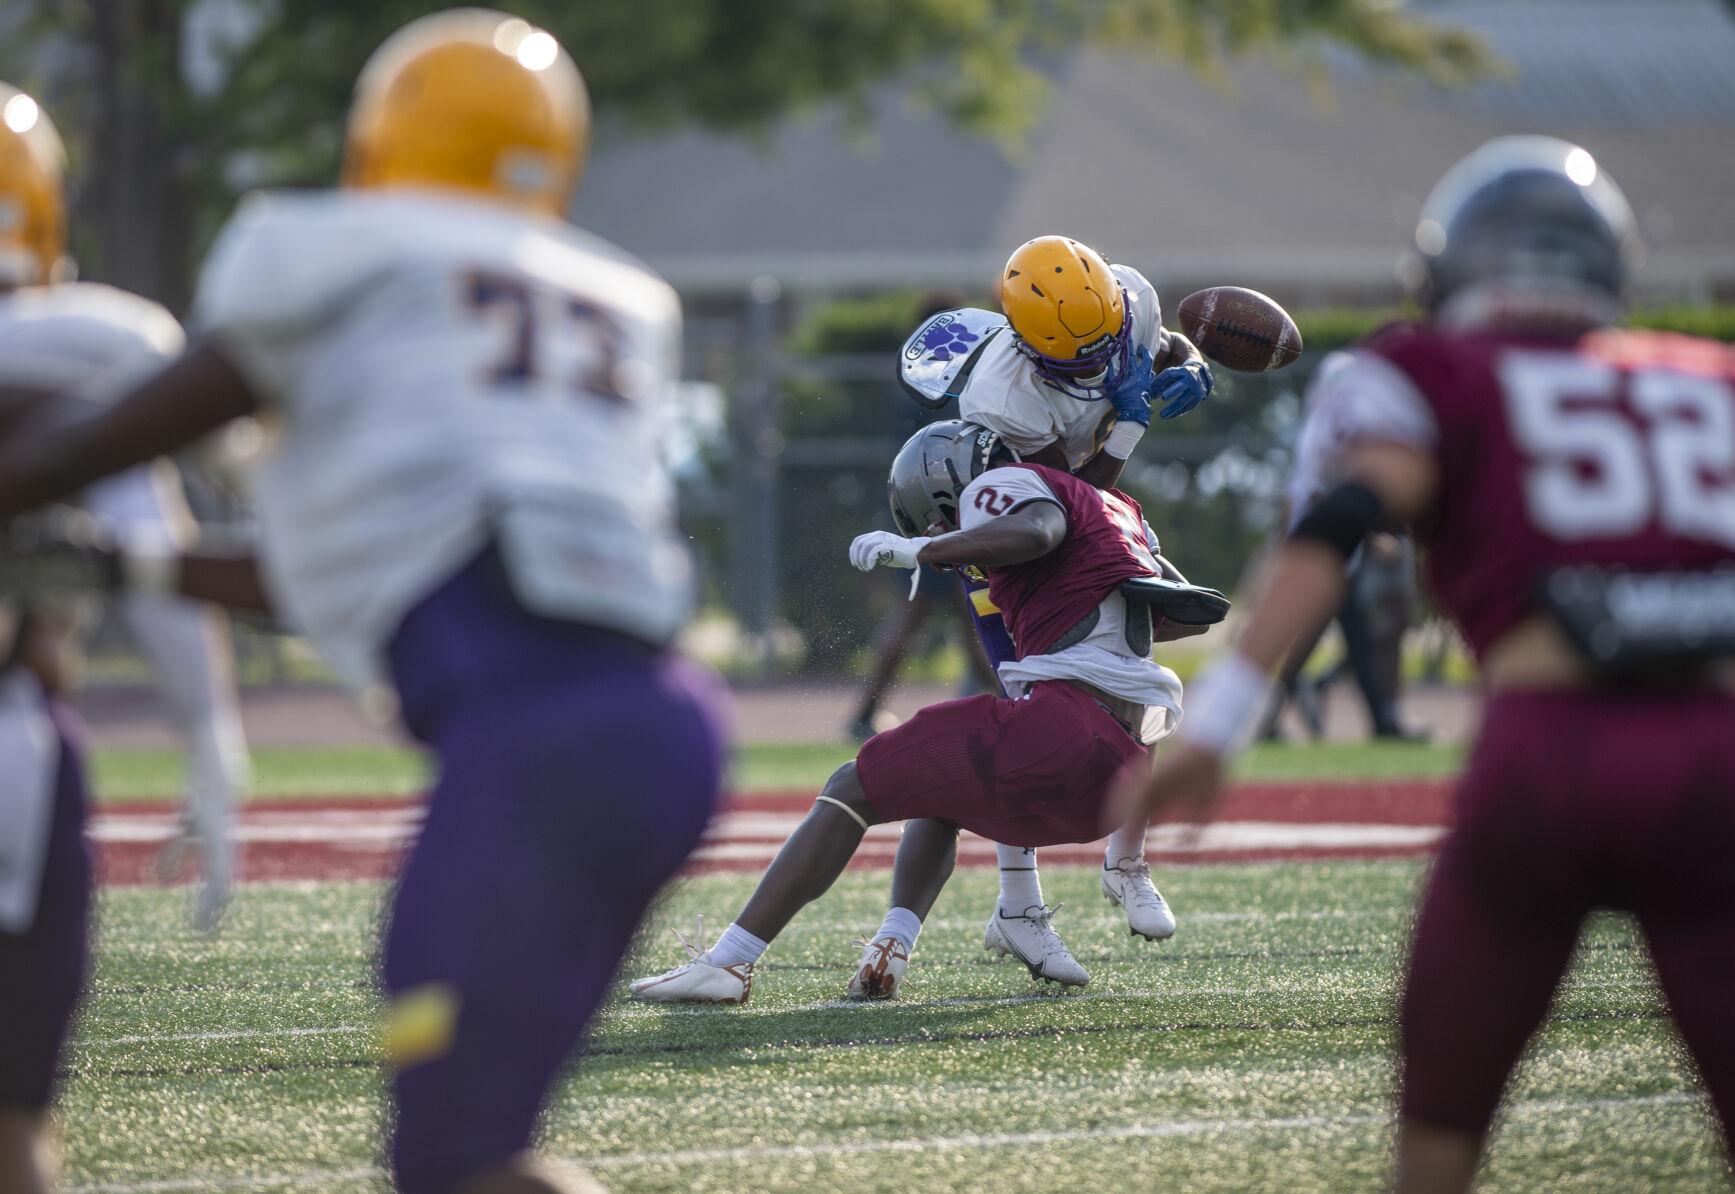 Photos Spring scrimmages showcase high school football talent as